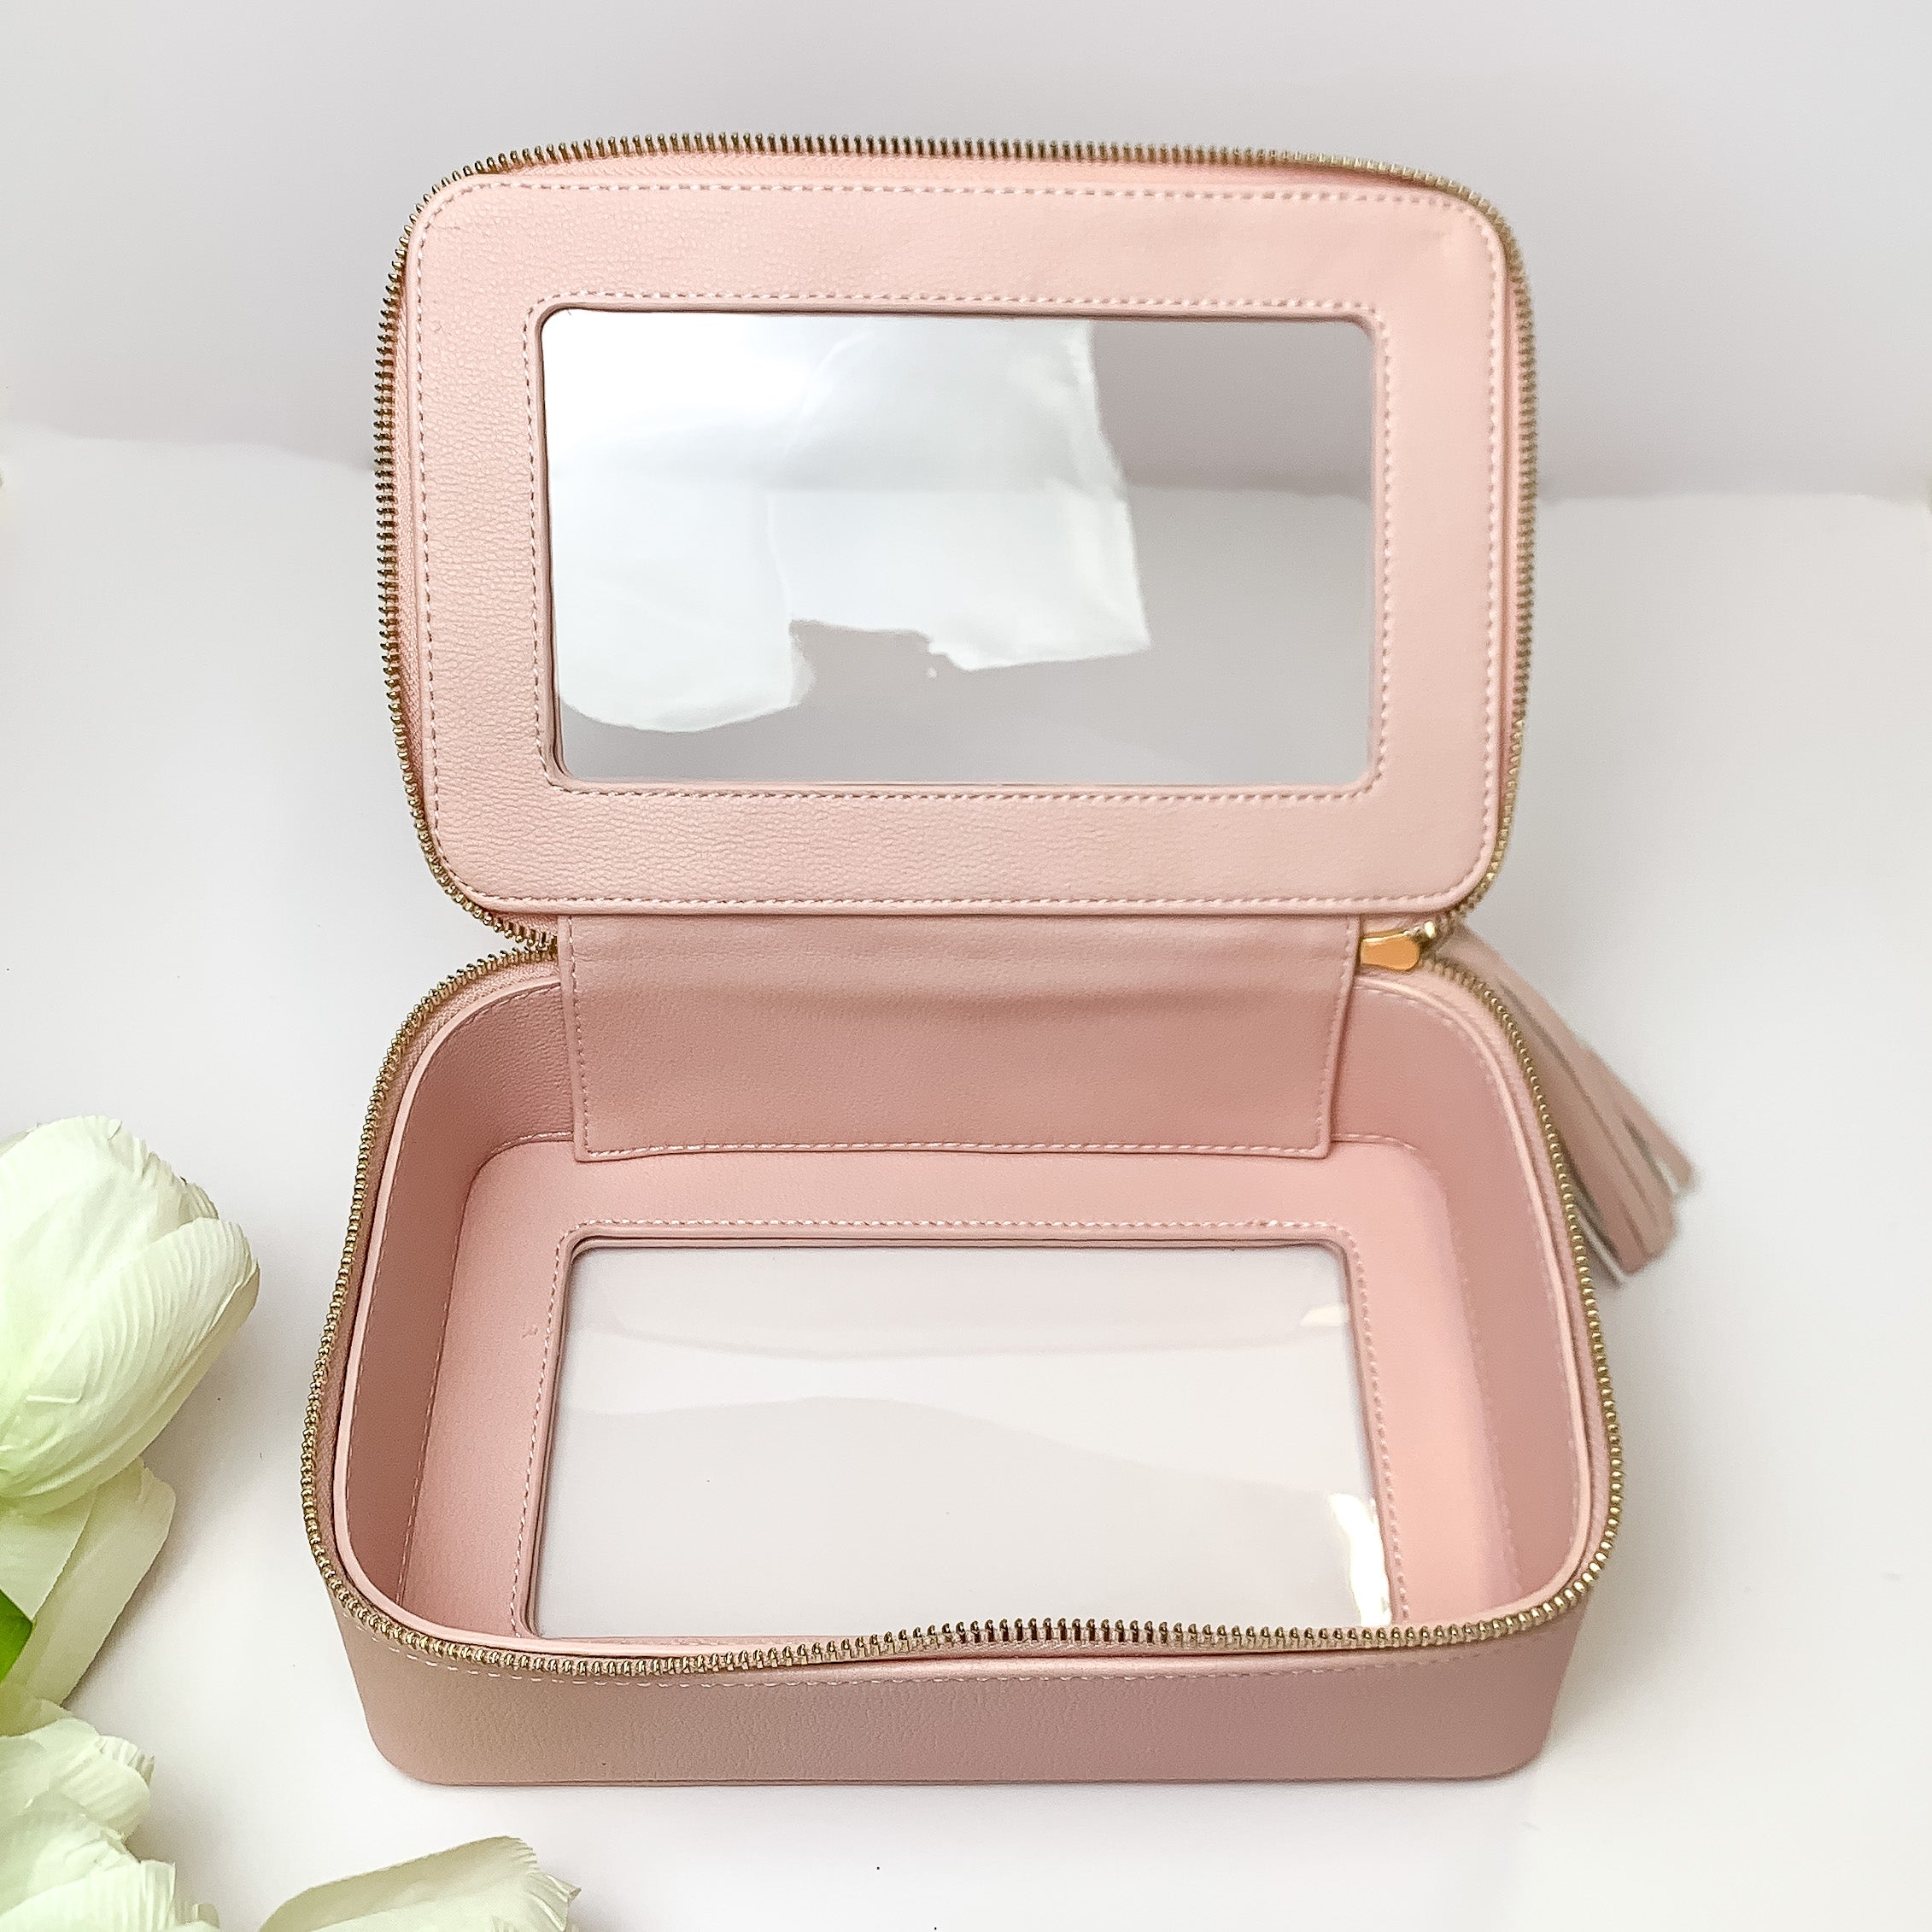 Hollis | Clear Toiletry Bag in Blush - Giddy Up Glamour Boutique